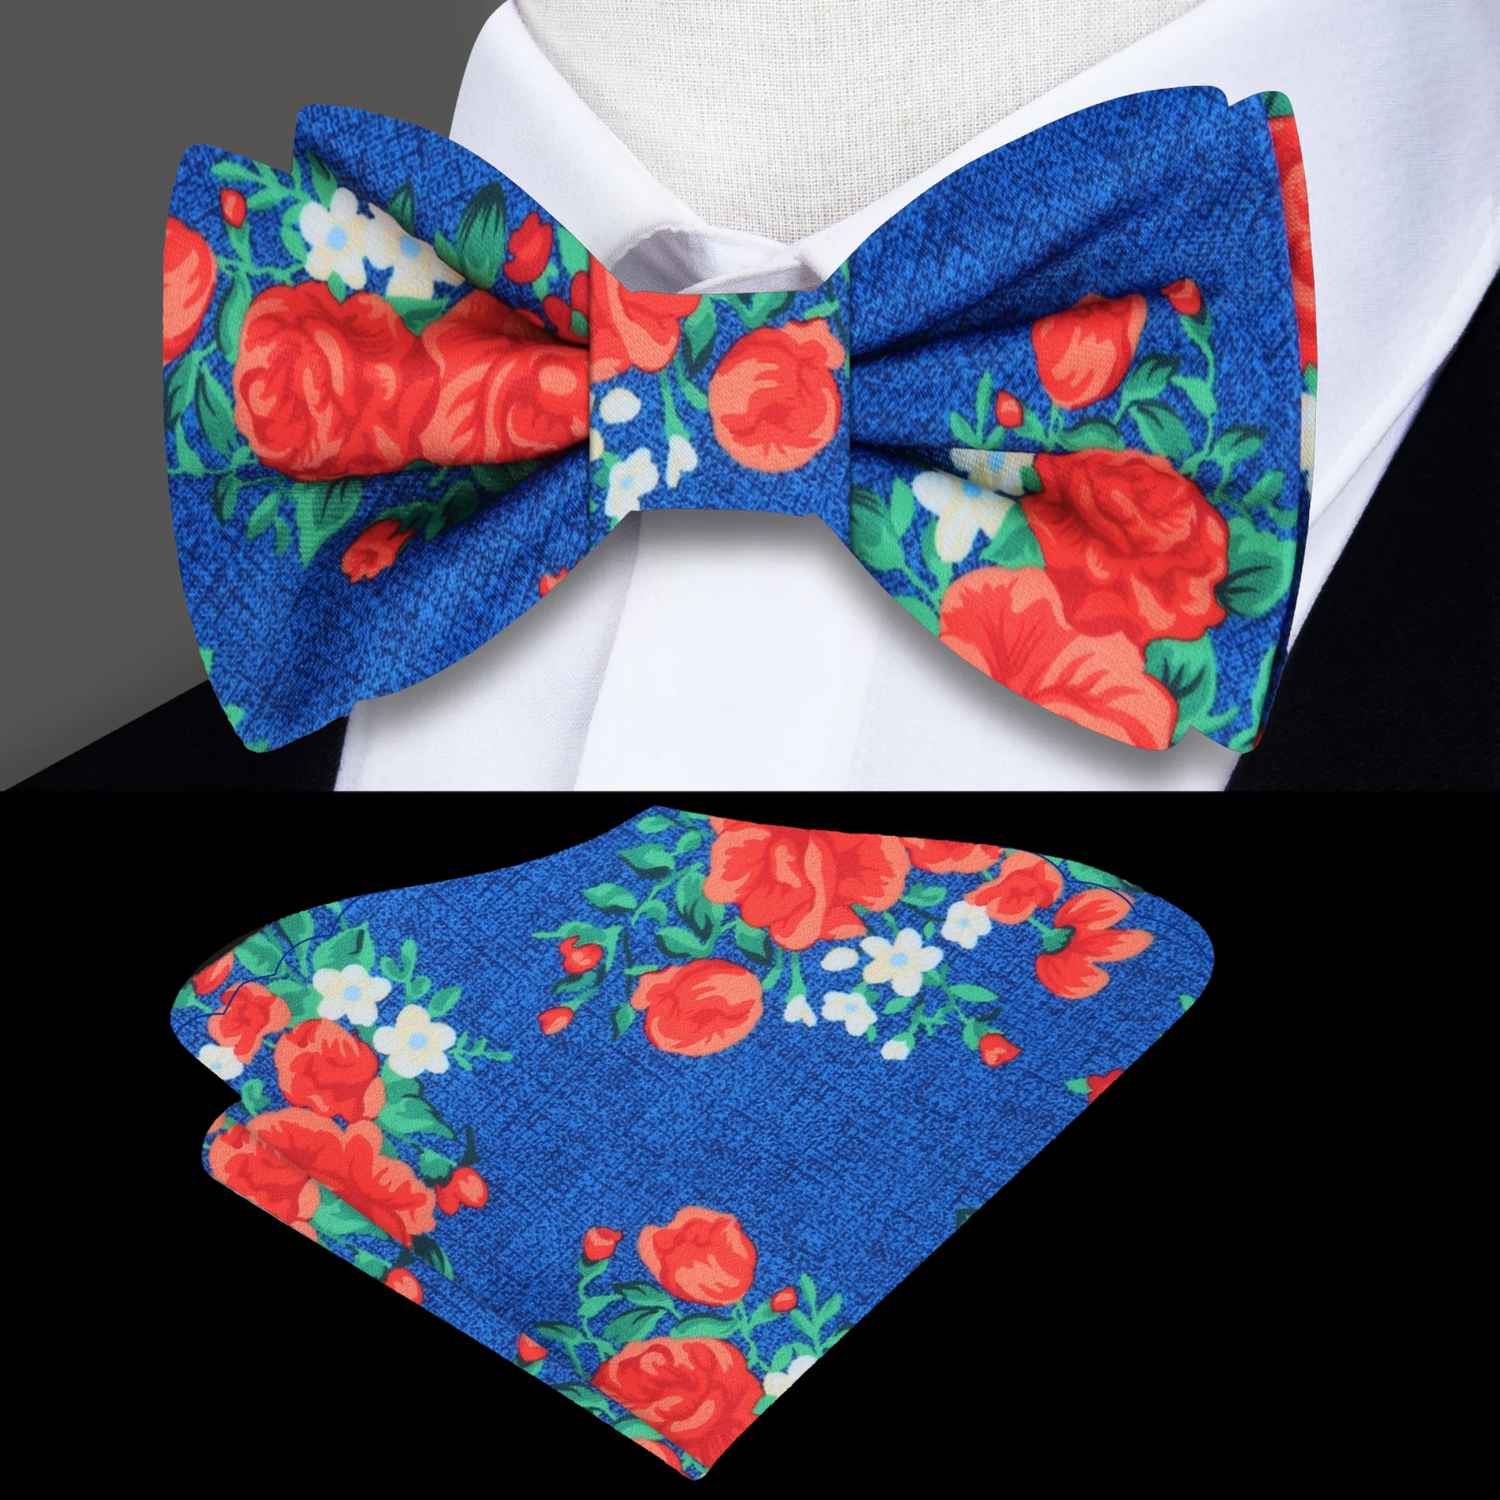 Rich Blue, Red, Green Rose Bunches Bow Tie and Pocket Square||Rich Blue